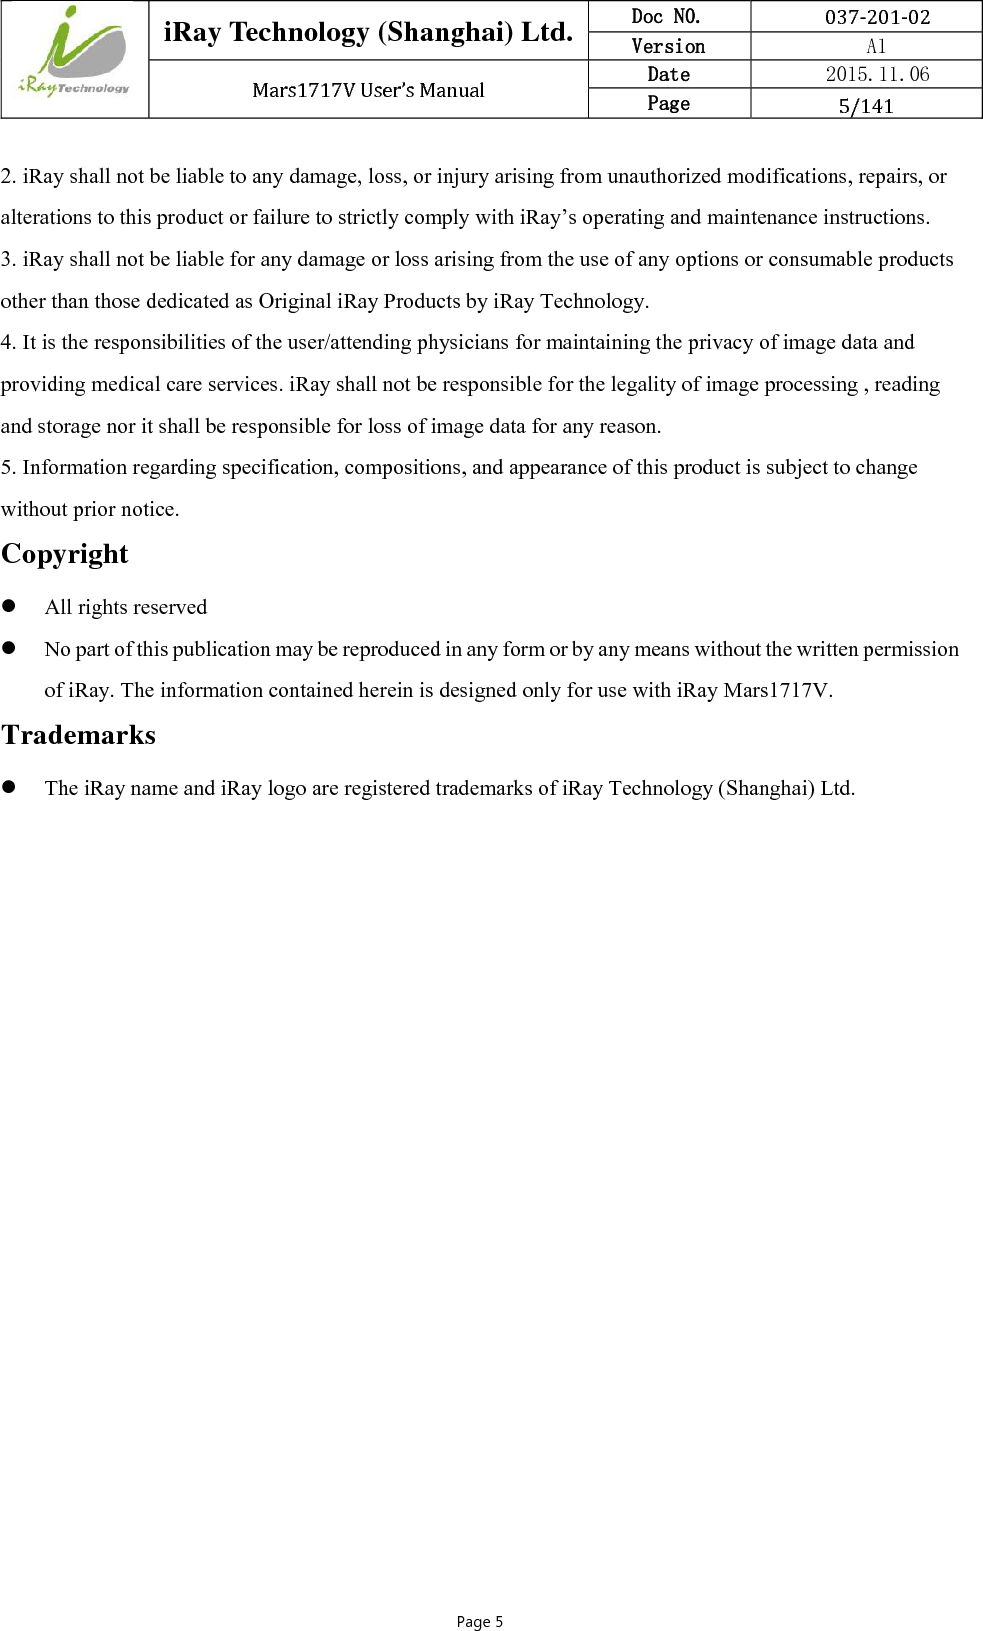  iRay Technology (Shanghai) Ltd. Doc N0.  037‐201‐02 Version    A1 Mars1717VUser’sManual Date  2015.11.06 Page  5/141Page 5 2. iRay shall not be liable to any damage, loss, or injury arising from unauthorized modifications, repairs, or alterations to this product or failure to strictly comply with iRay’s operating and maintenance instructions. 3. iRay shall not be liable for any damage or loss arising from the use of any options or consumable products other than those dedicated as Original iRay Products by iRay Technology. 4. It is the responsibilities of the user/attending physicians for maintaining the privacy of image data and providing medical care services. iRay shall not be responsible for the legality of image processing , reading and storage nor it shall be responsible for loss of image data for any reason. 5. Information regarding specification, compositions, and appearance of this product is subject to change without prior notice. Copyright  All rights reserved  No part of this publication may be reproduced in any form or by any means without the written permission of iRay. The information contained herein is designed only for use with iRay Mars1717V. Trademarks  The iRay name and iRay logo are registered trademarks of iRay Technology (Shanghai) Ltd.    